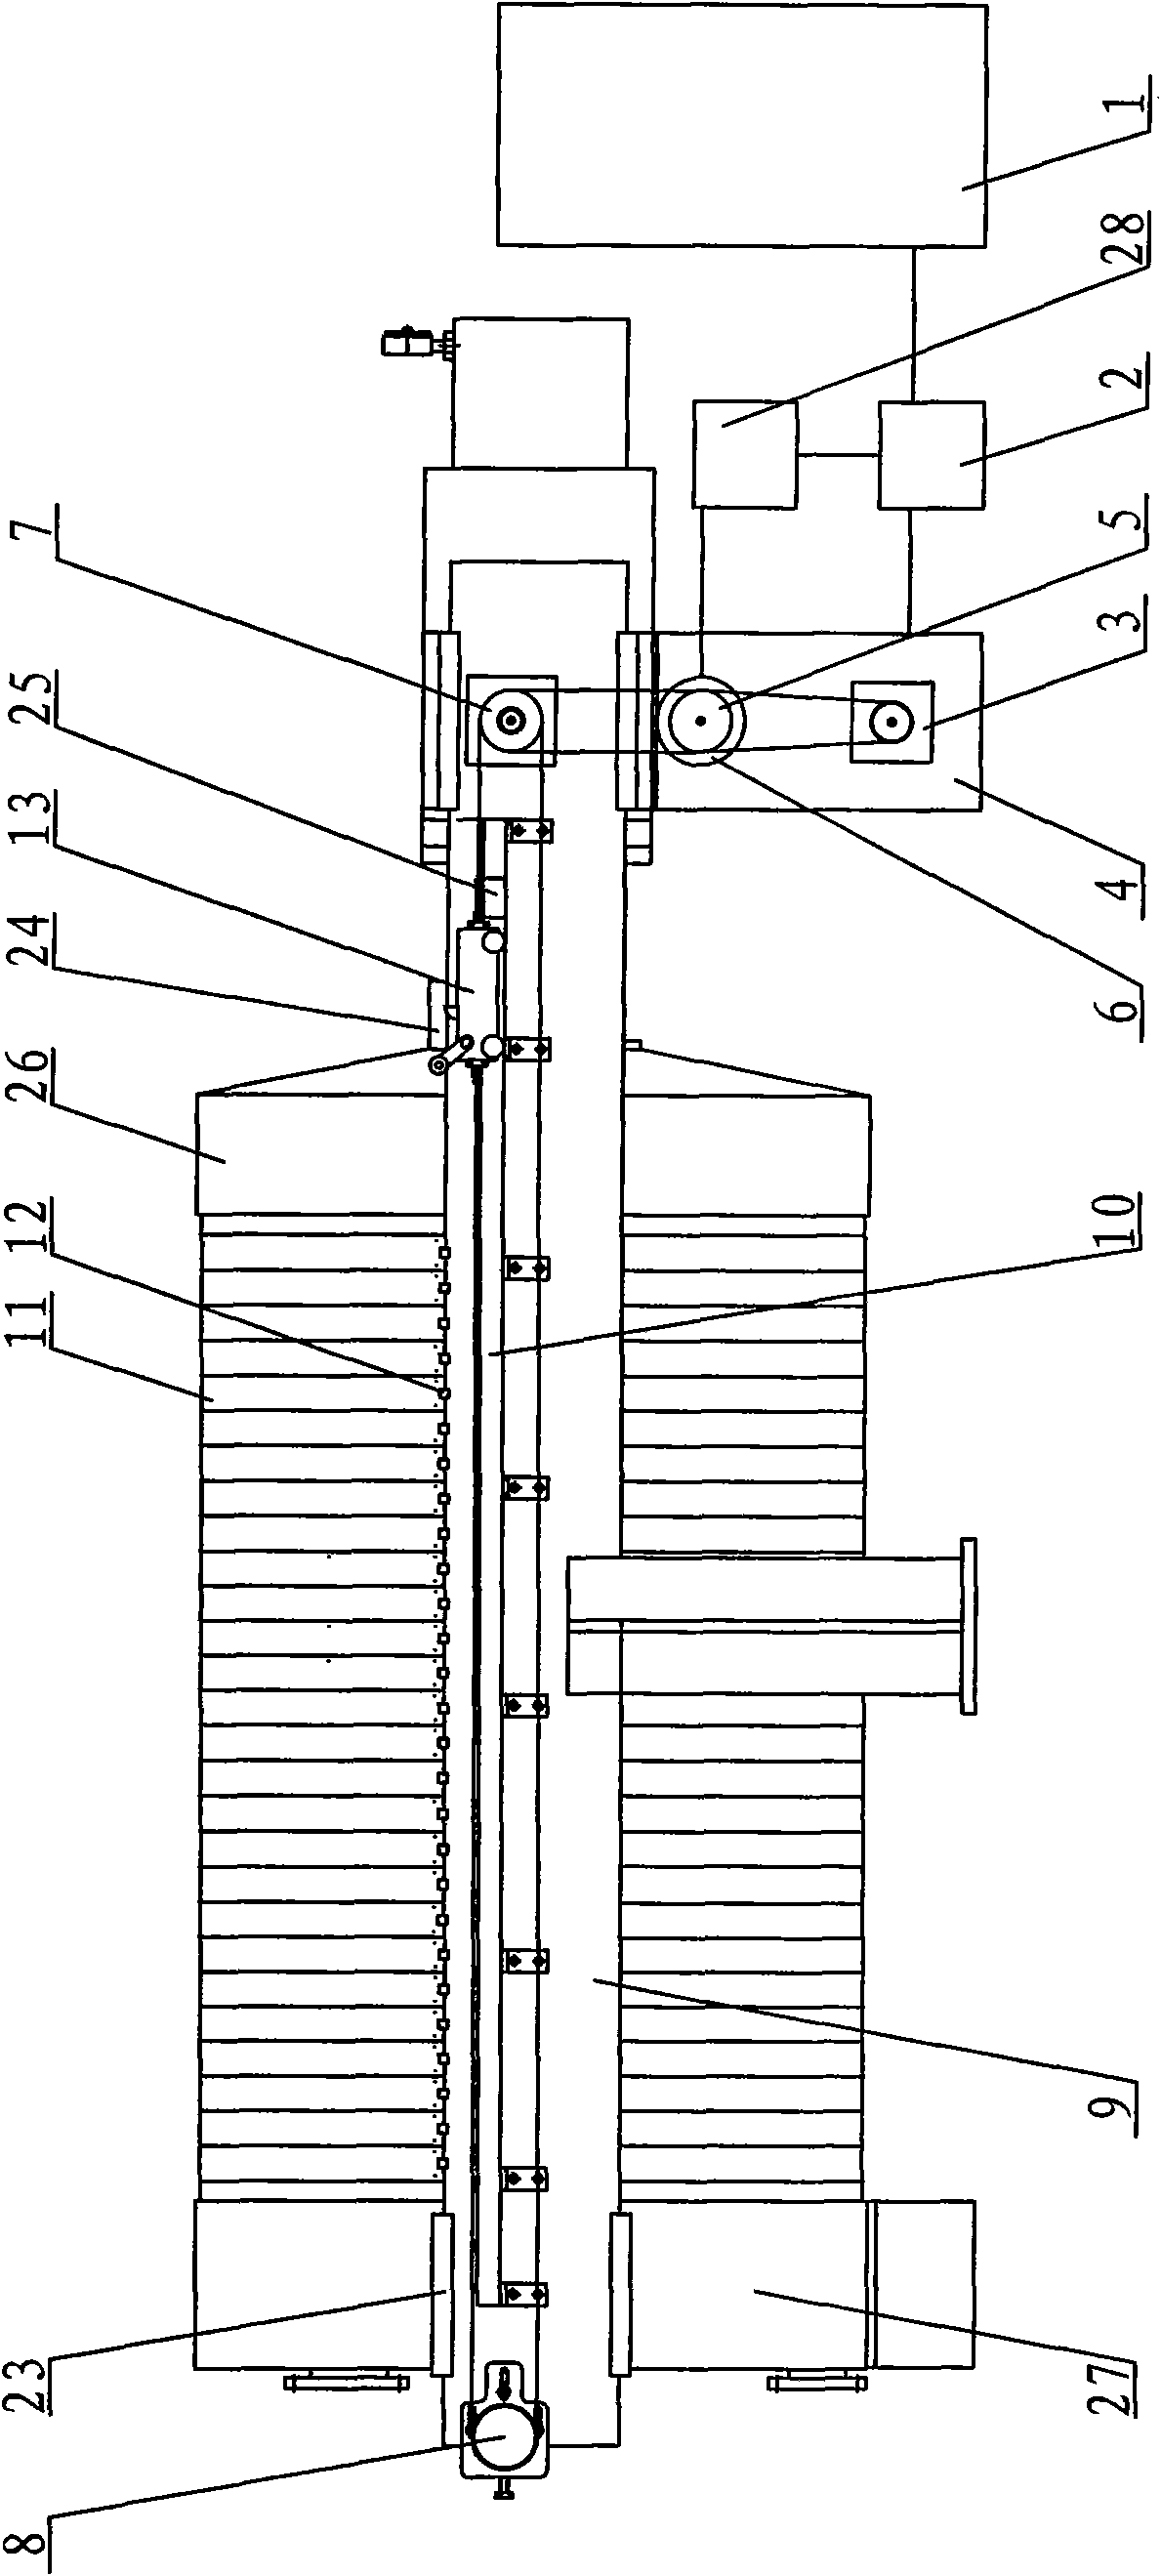 Full-automatic hydraulic plate pulling mechanism of filter press